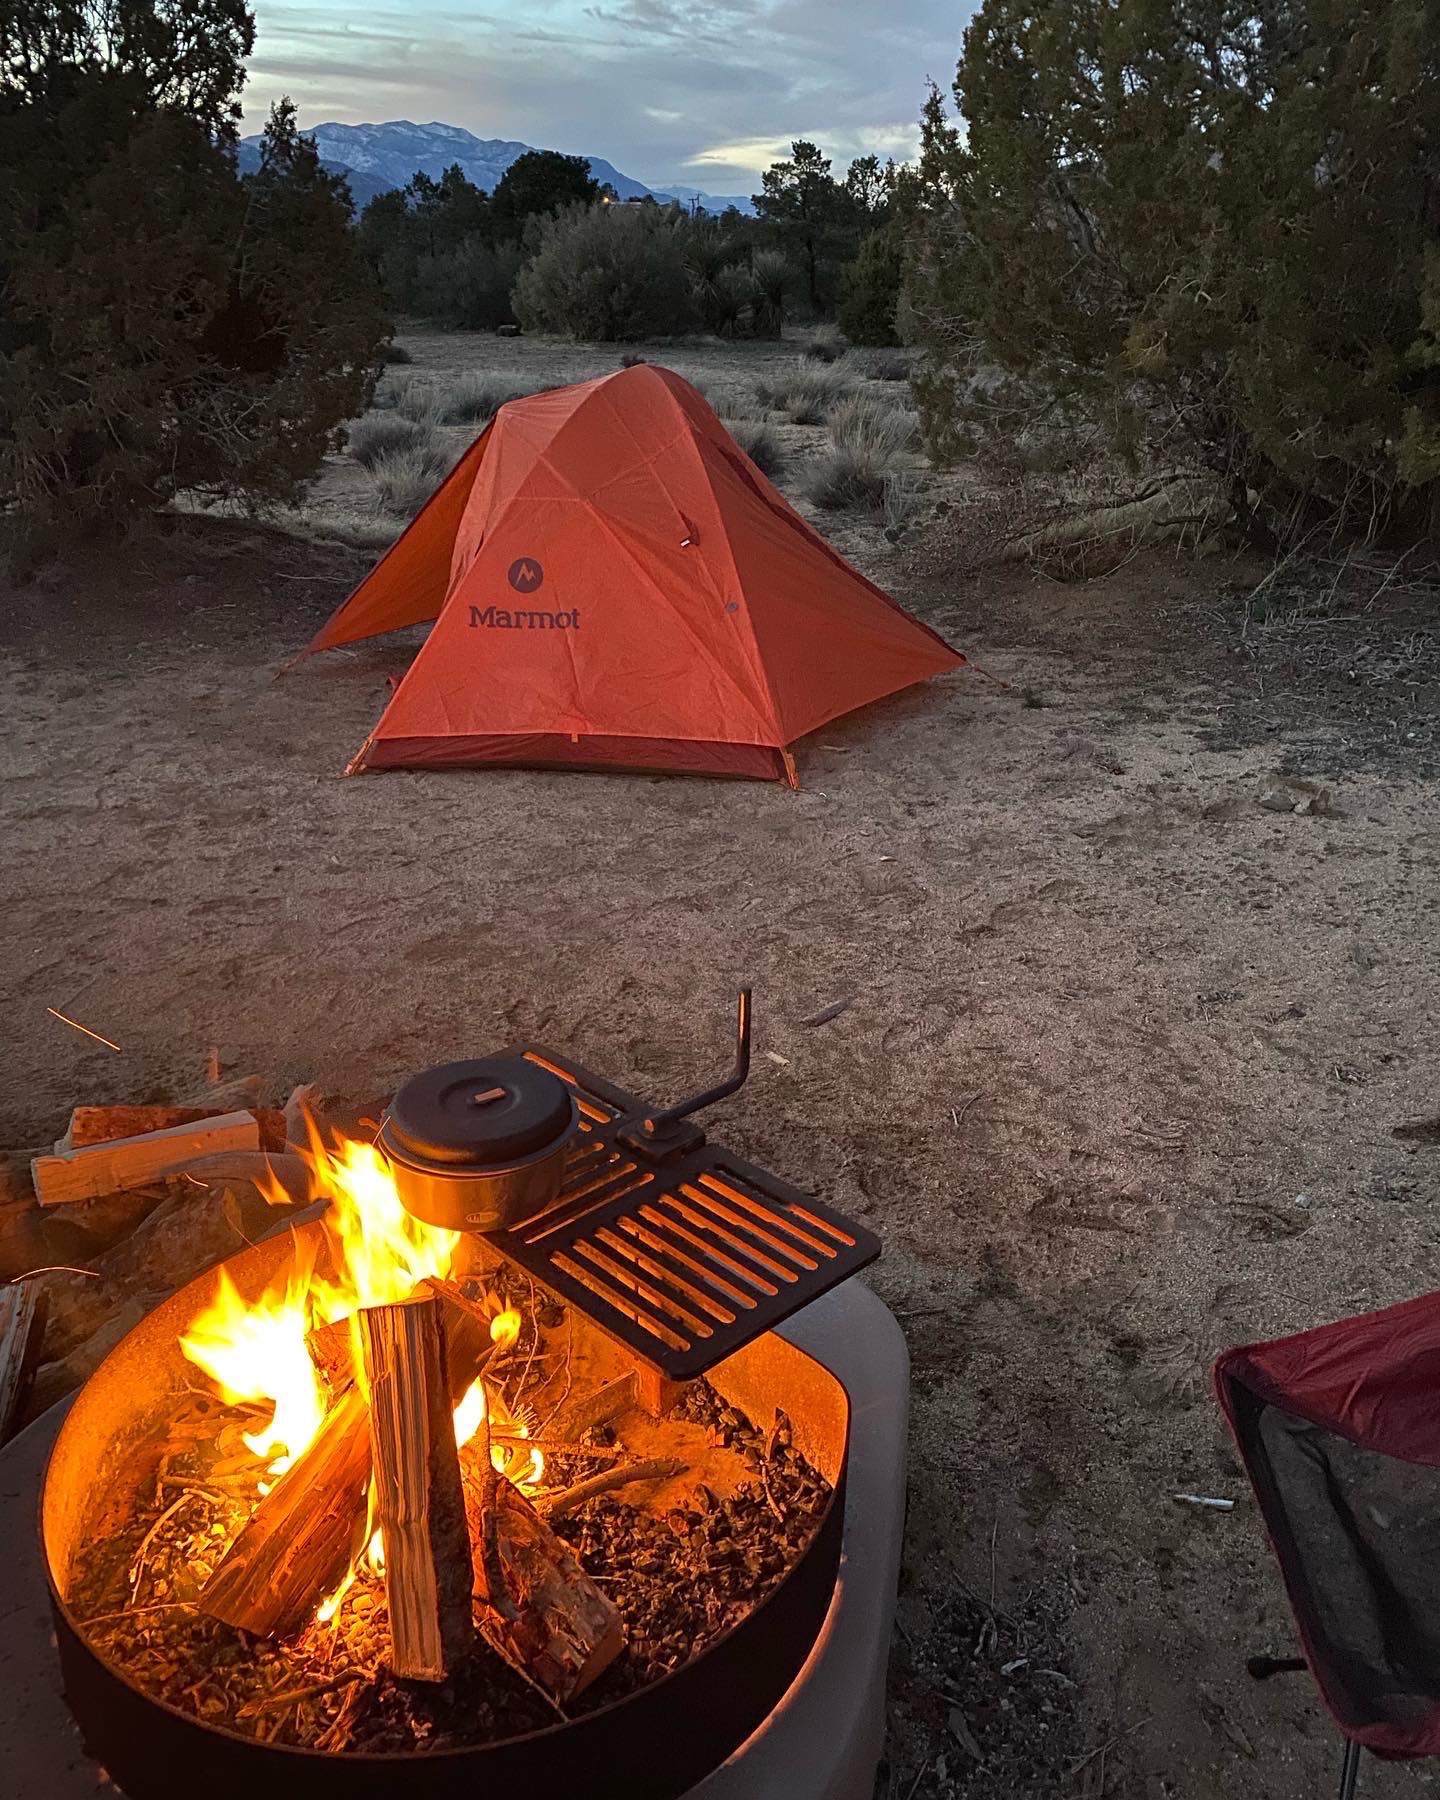 Tent and campfire at a campground in the southern California mountains. Camping